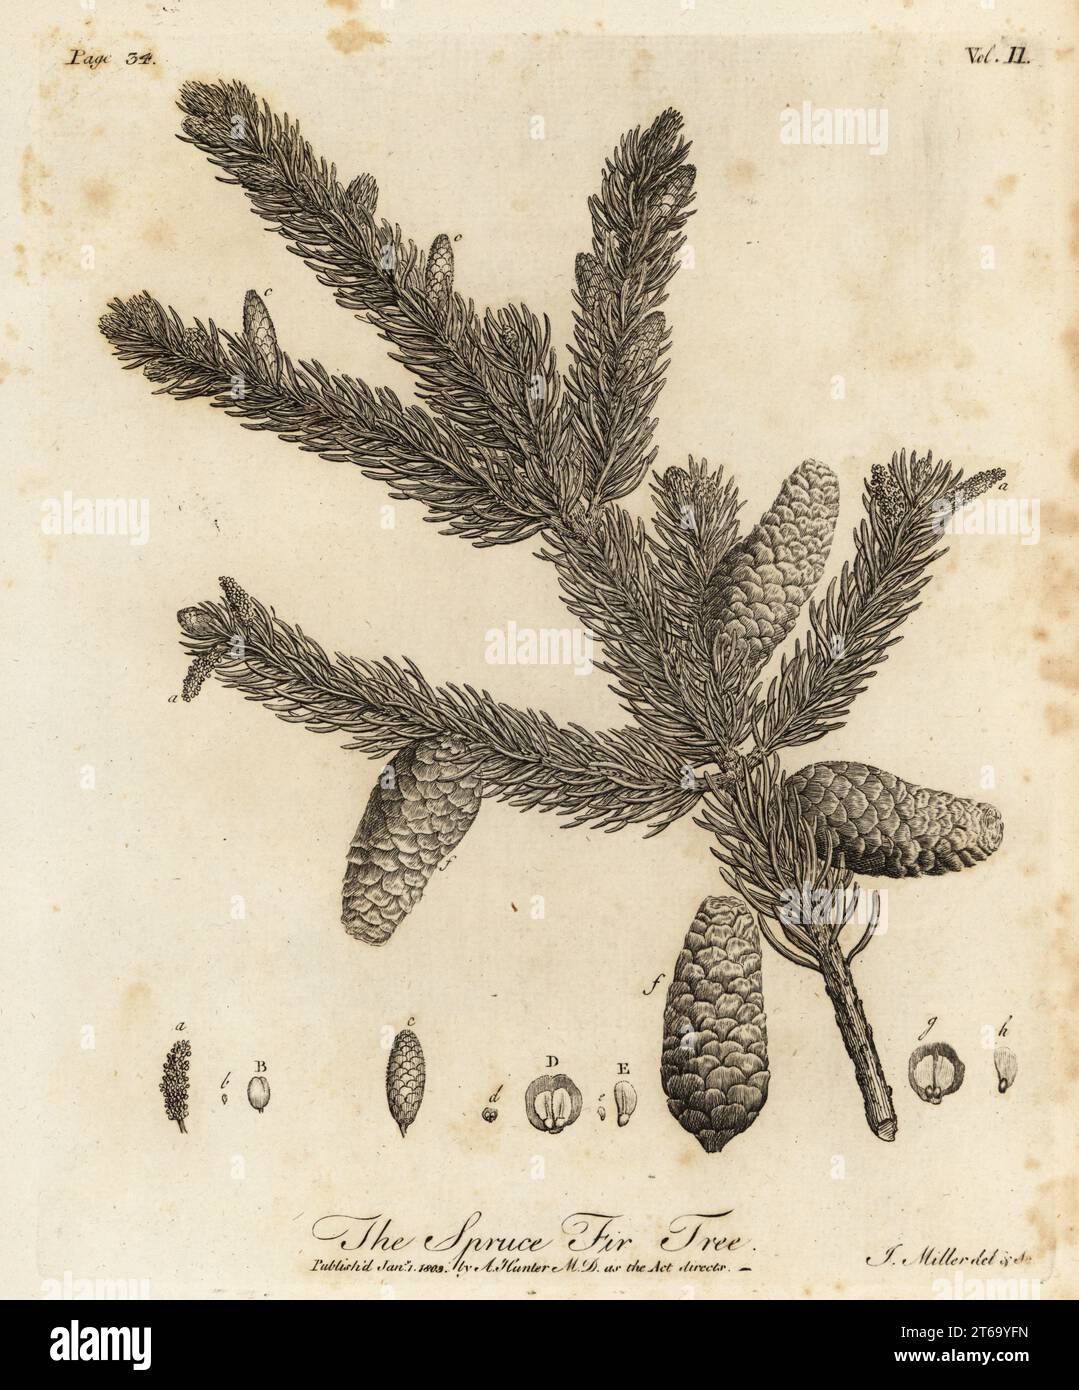 Norway spruce or European spruce, Picea abies. Spruce Fir Tree, Pinus abies. Copperplate engraving drawn and engraved by John Miller (Johann Sebastian Muller) from John Evelyns Sylva, or A Discourse of Forest Trees and the Propagation of Timer, J. Dodsley, London, 1776. Stock Photo